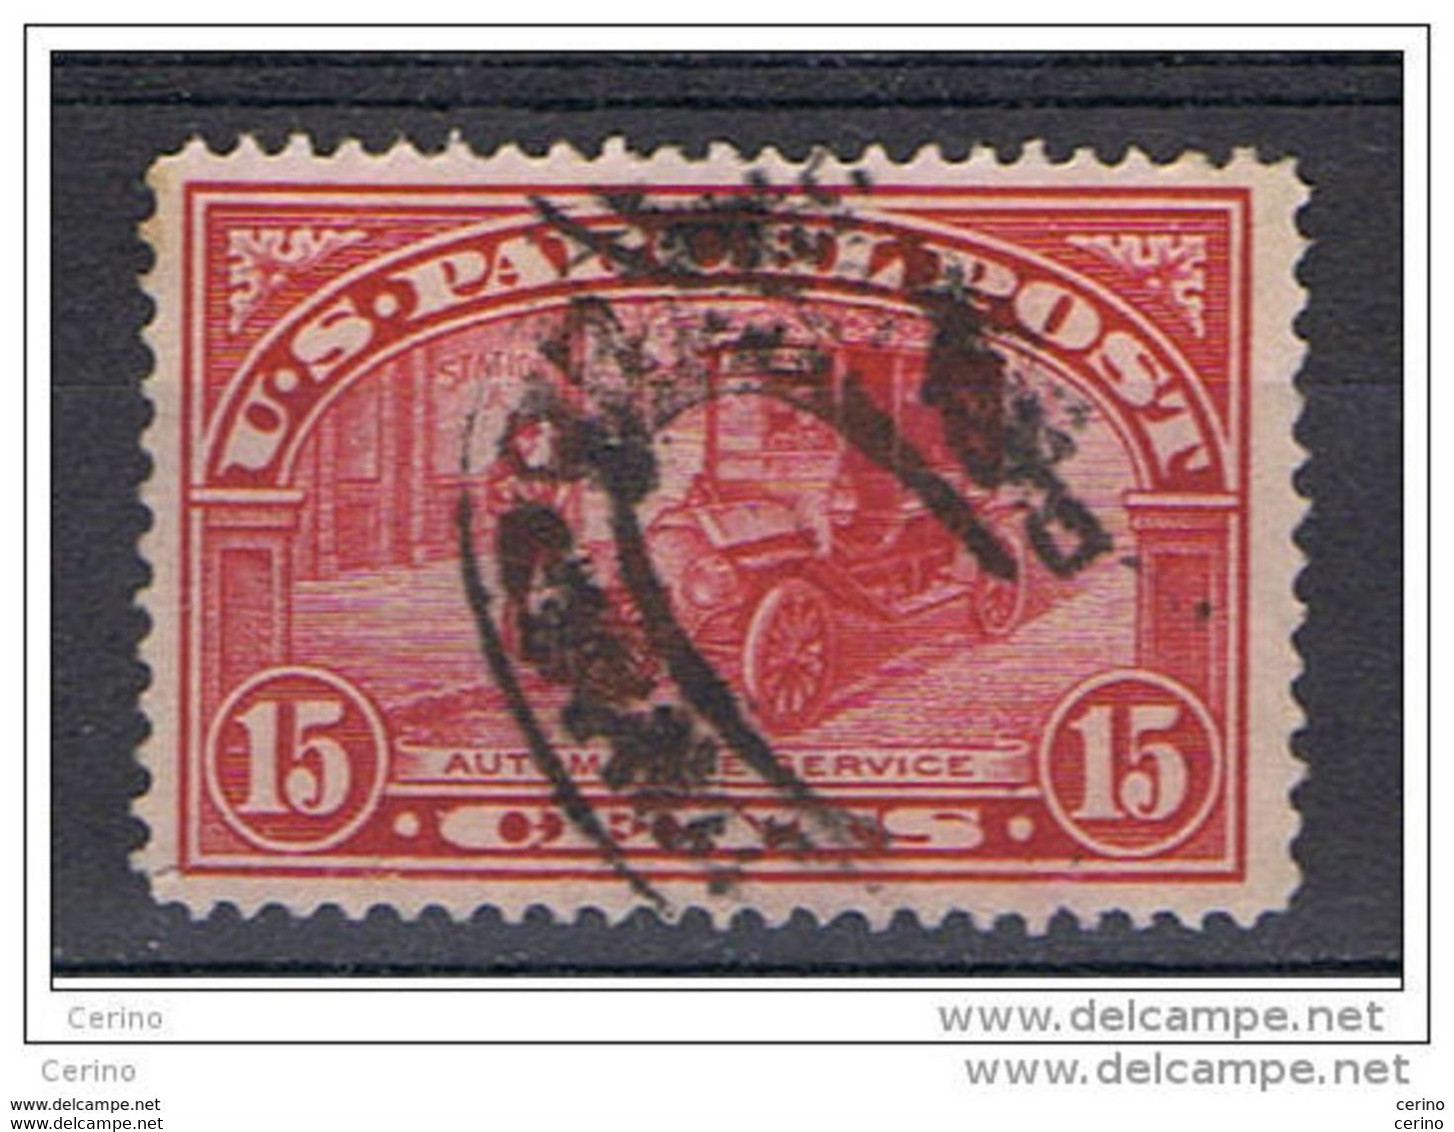 U.S.A.:  1912  PARCEL  POST  -  15 C. USED  STAMP  -  YV/TELL. 7 - Parcel Post & Special Handling